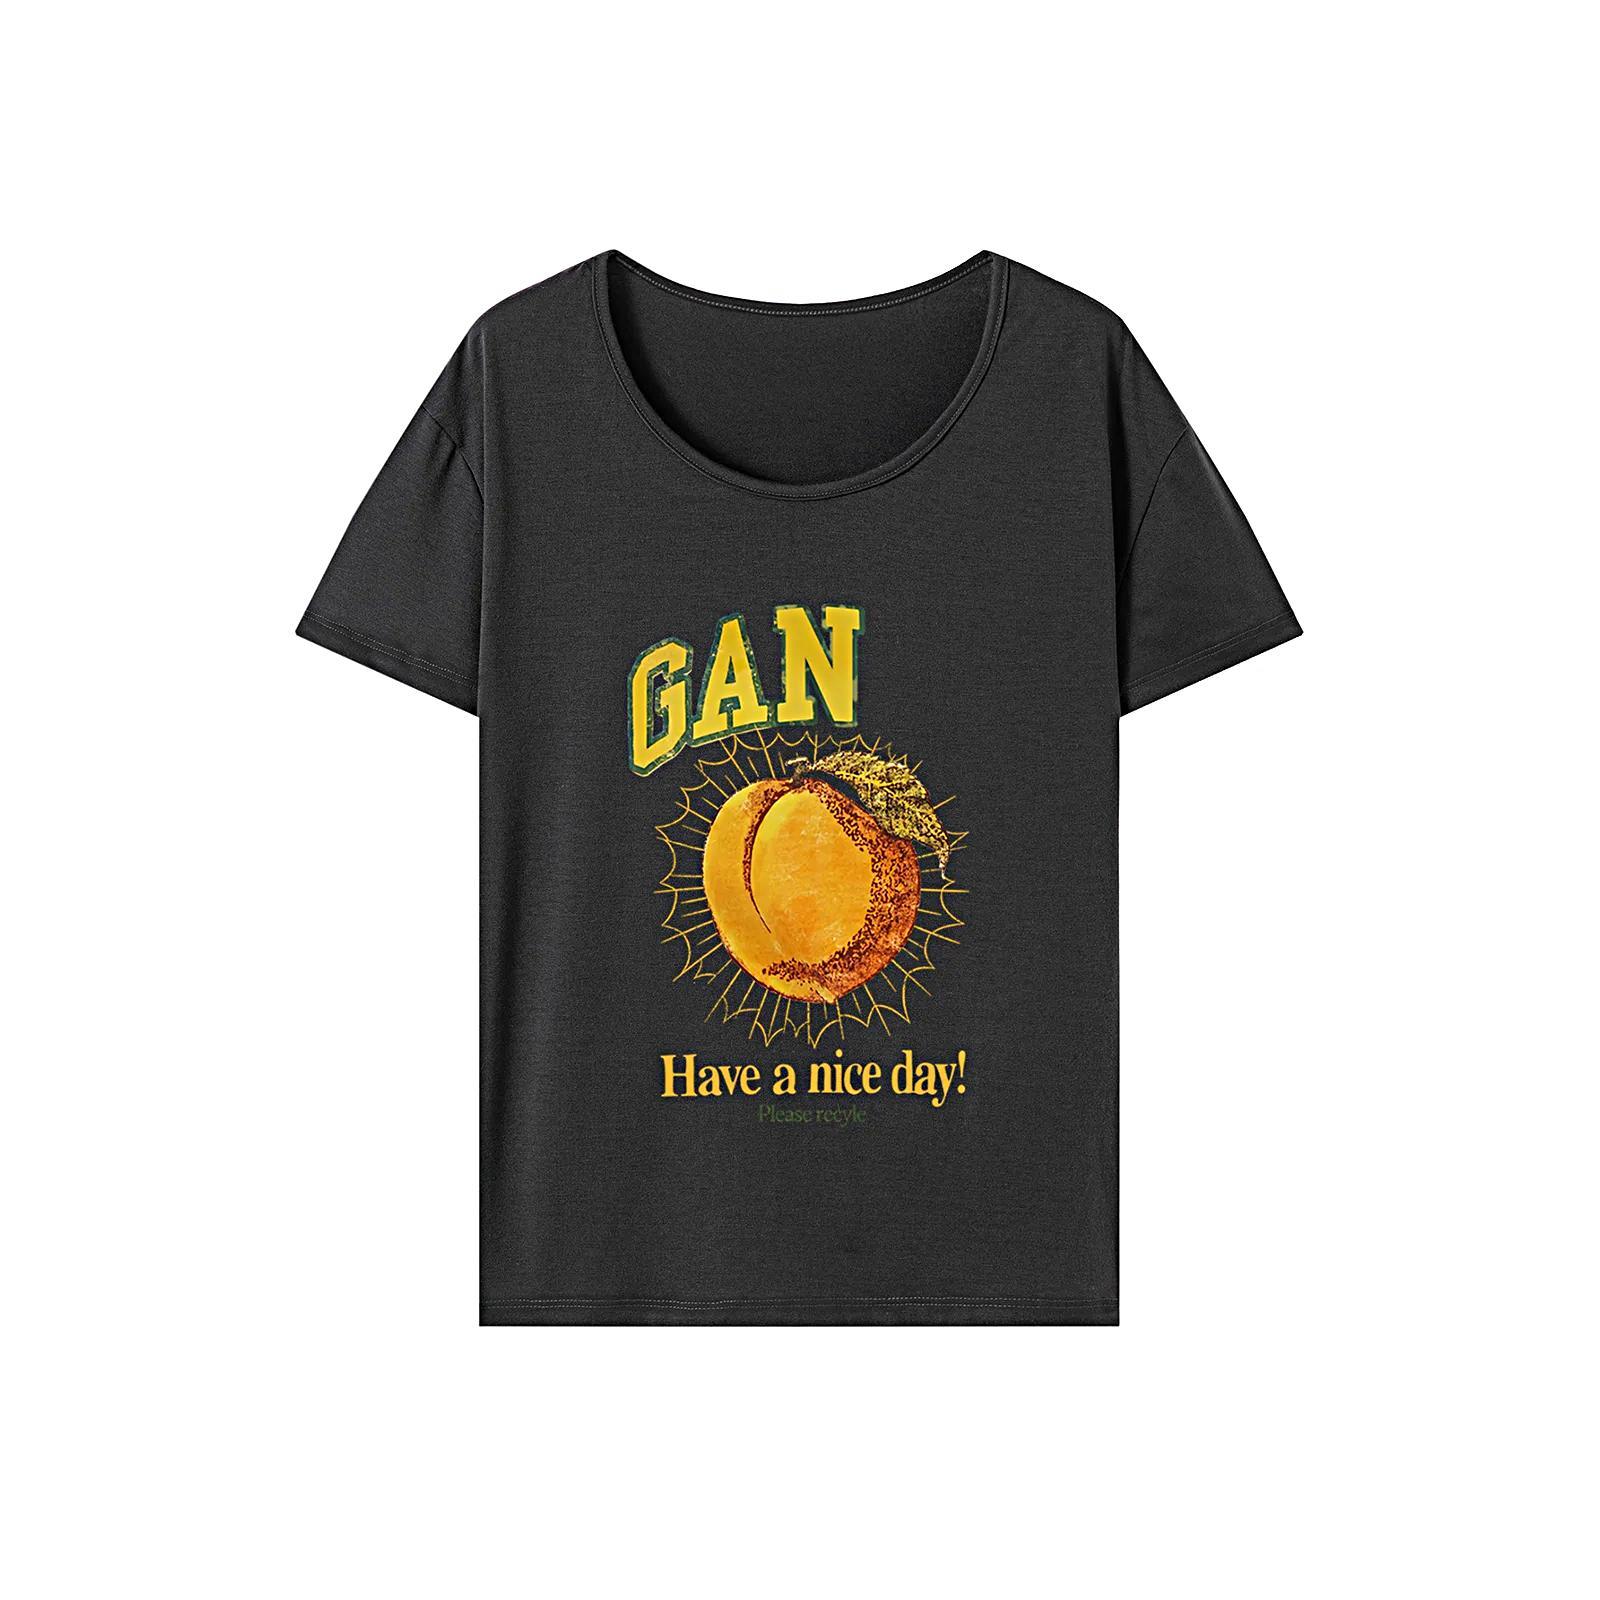 T Shirt for Women Summer Round Neck Short Sleeve Top for Vacation Work Beach S